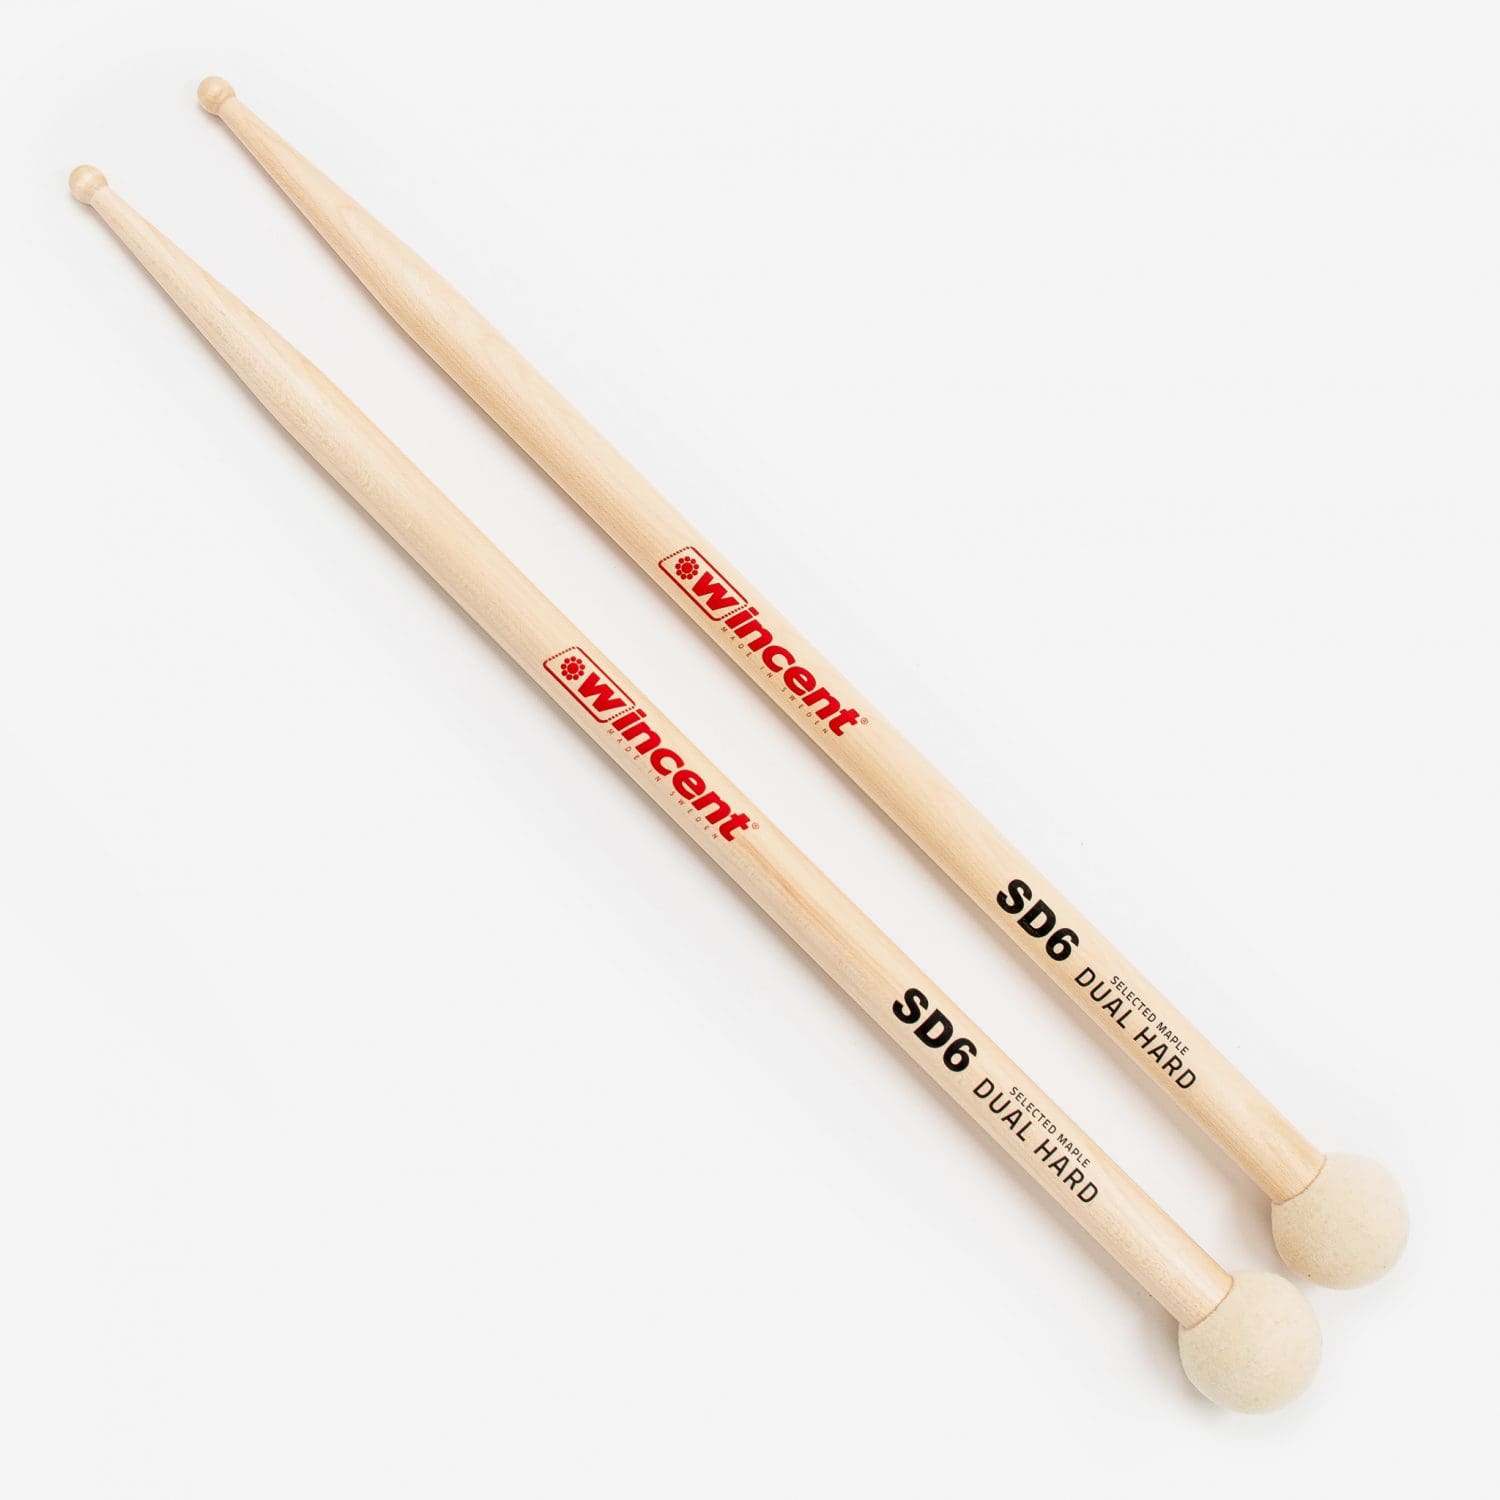 Dual Hard Double Sided Cymbal Mallet Pair